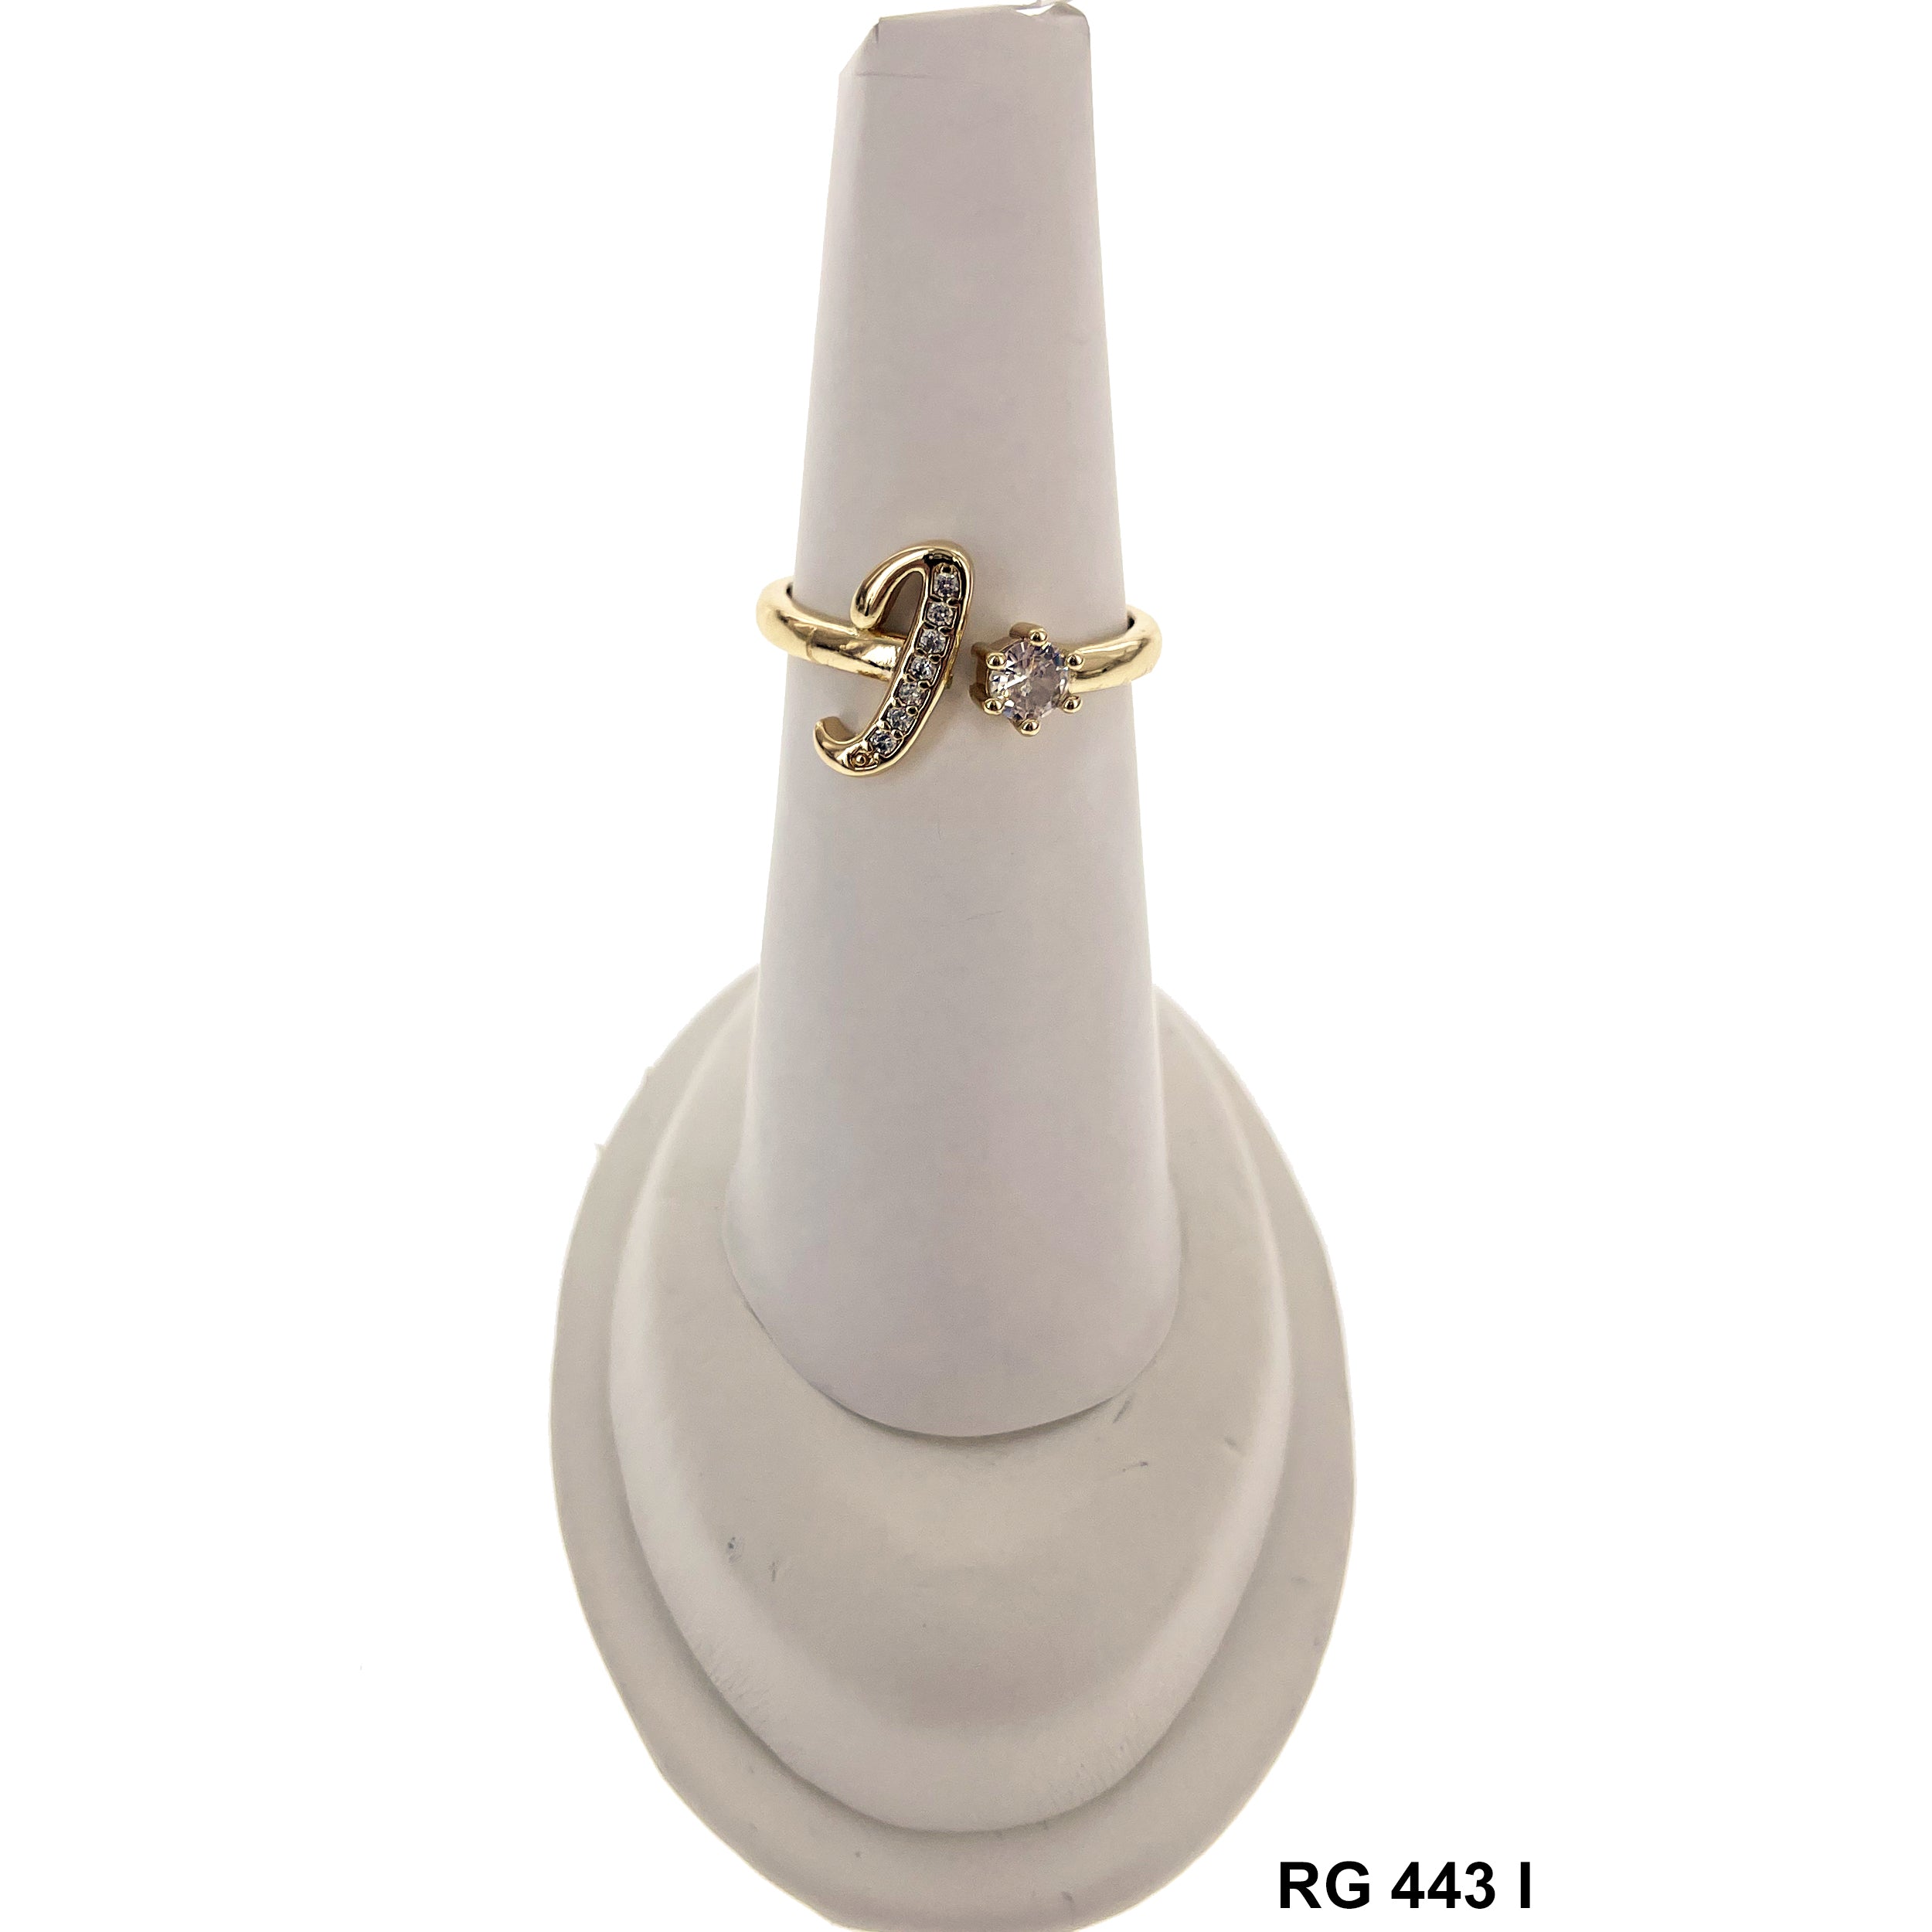 Initial Adjustable Ring RG 443 I